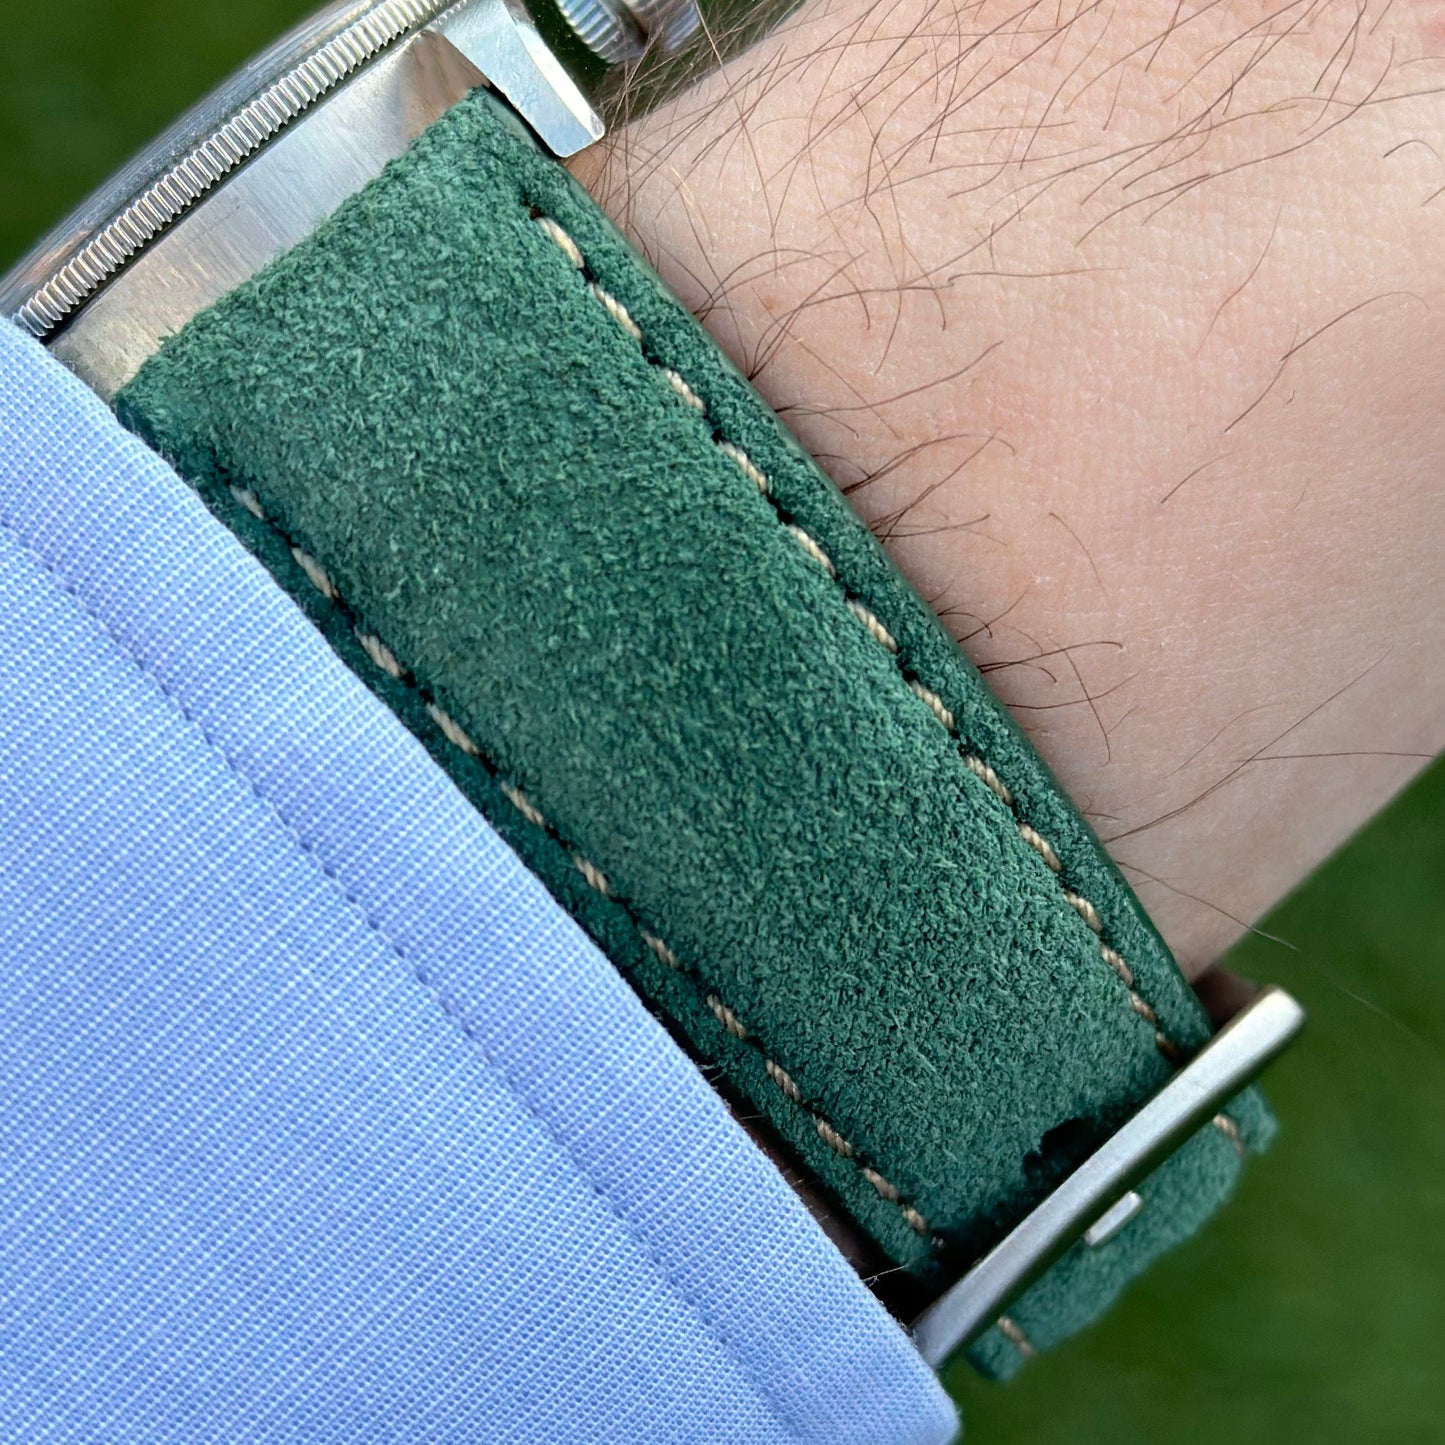 Paris hunter green suede watch strap on the Tudor Blackbay 58. Contrast ivory stitching. Watch And Strap.